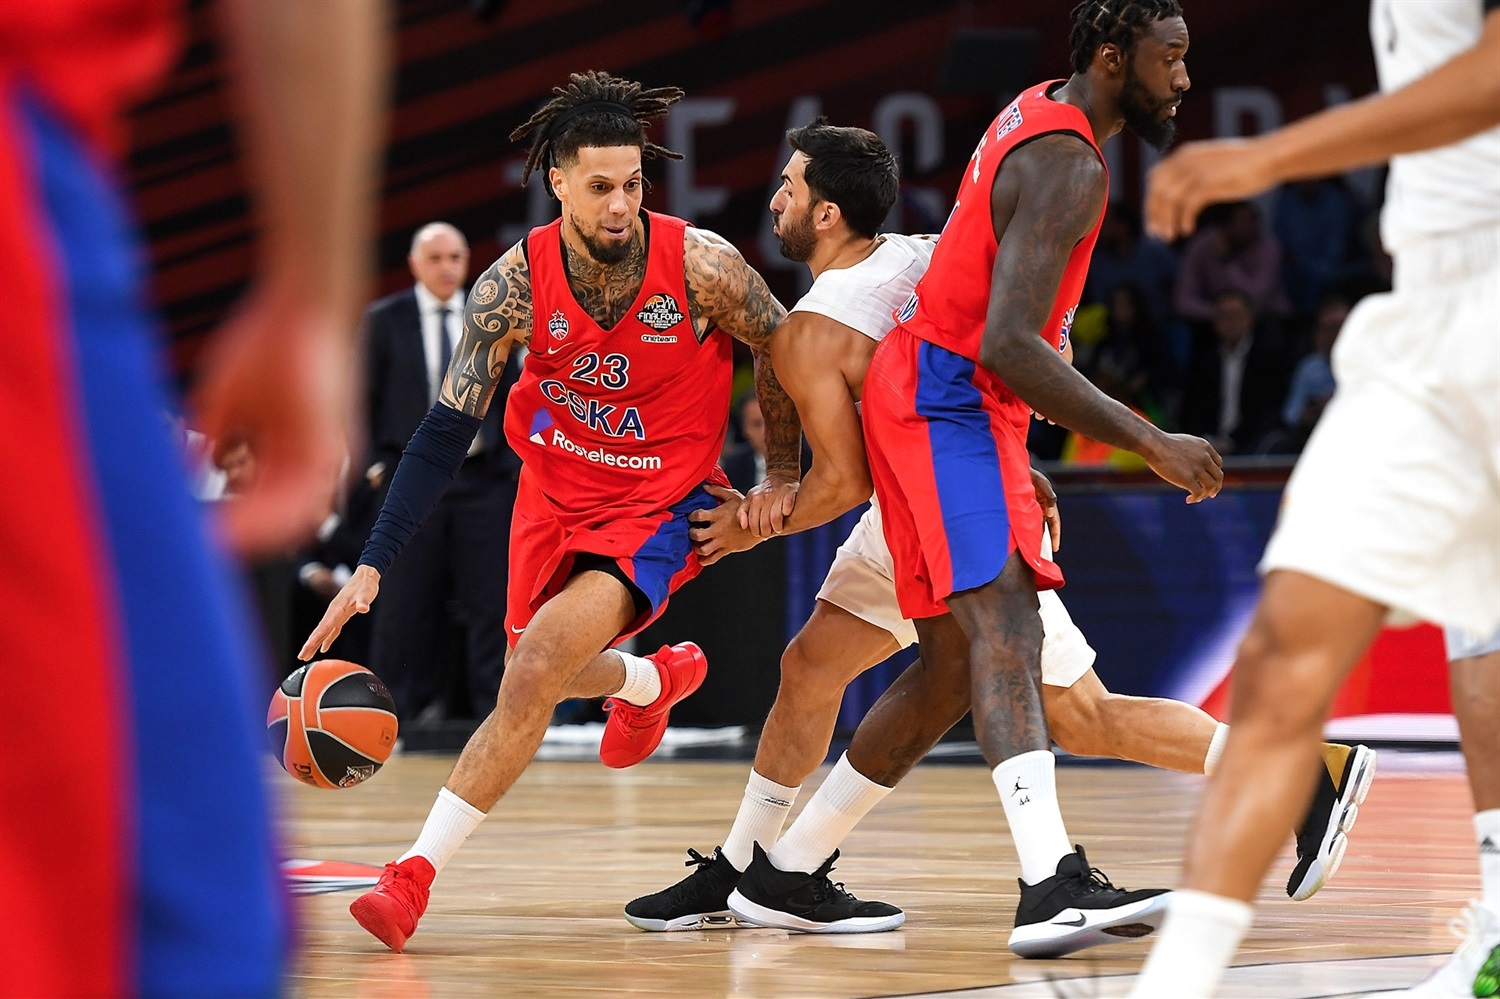 CSKA Moscow vs Anadolu Efes in the EuroLeague Championship Game